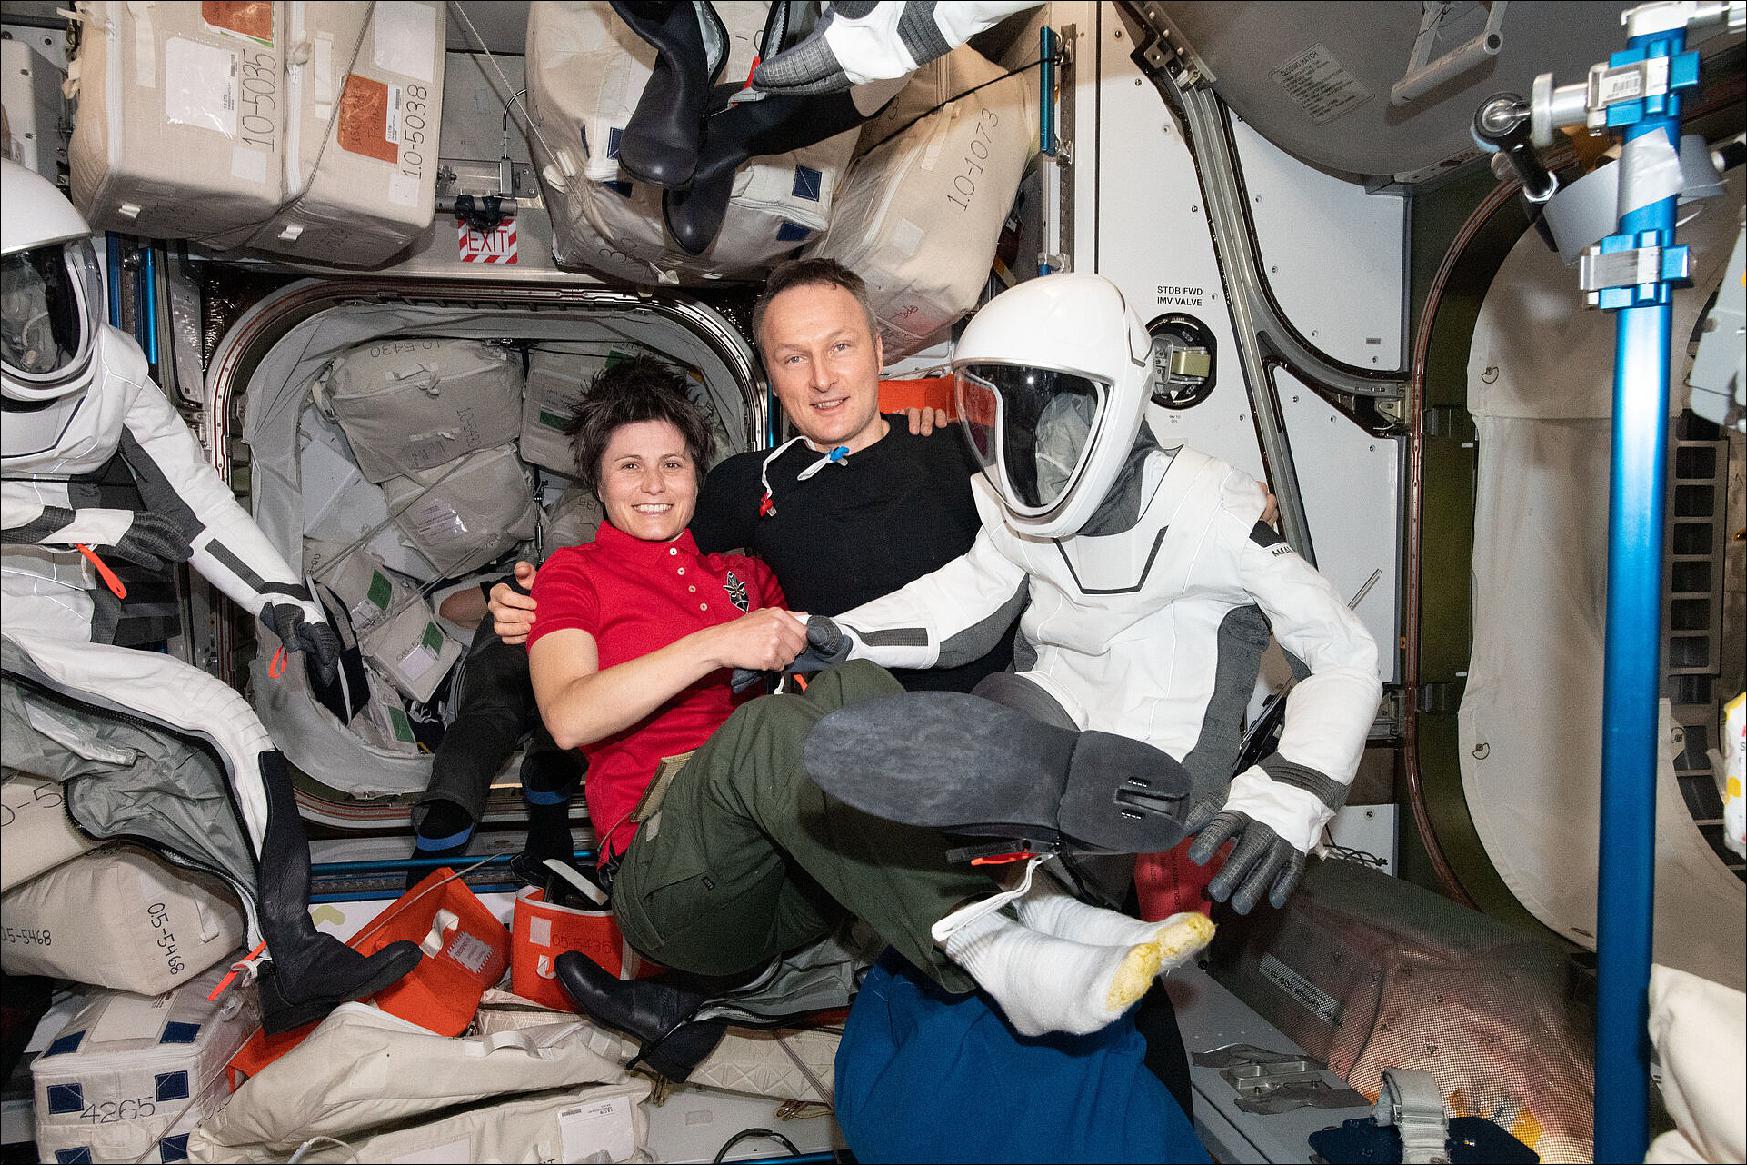 Figure 17: In late April 2022, for the first time since mid 2011, ESA had two astronauts living and working together aboard the International Space Station. Samantha Cristoforetti arrived with Crew-4 on 28 April in SpaceX Crew Dragon Freedom, while Matthias departed with his Crew-3 colleagues, NASA astronauts Raja Chari, Thomas Marshburn and Kayla Barron, on Thursday 5 May. This image with a SpaceX spacesuit was captured during their time together in orbit (image credit: ESA/NASA)